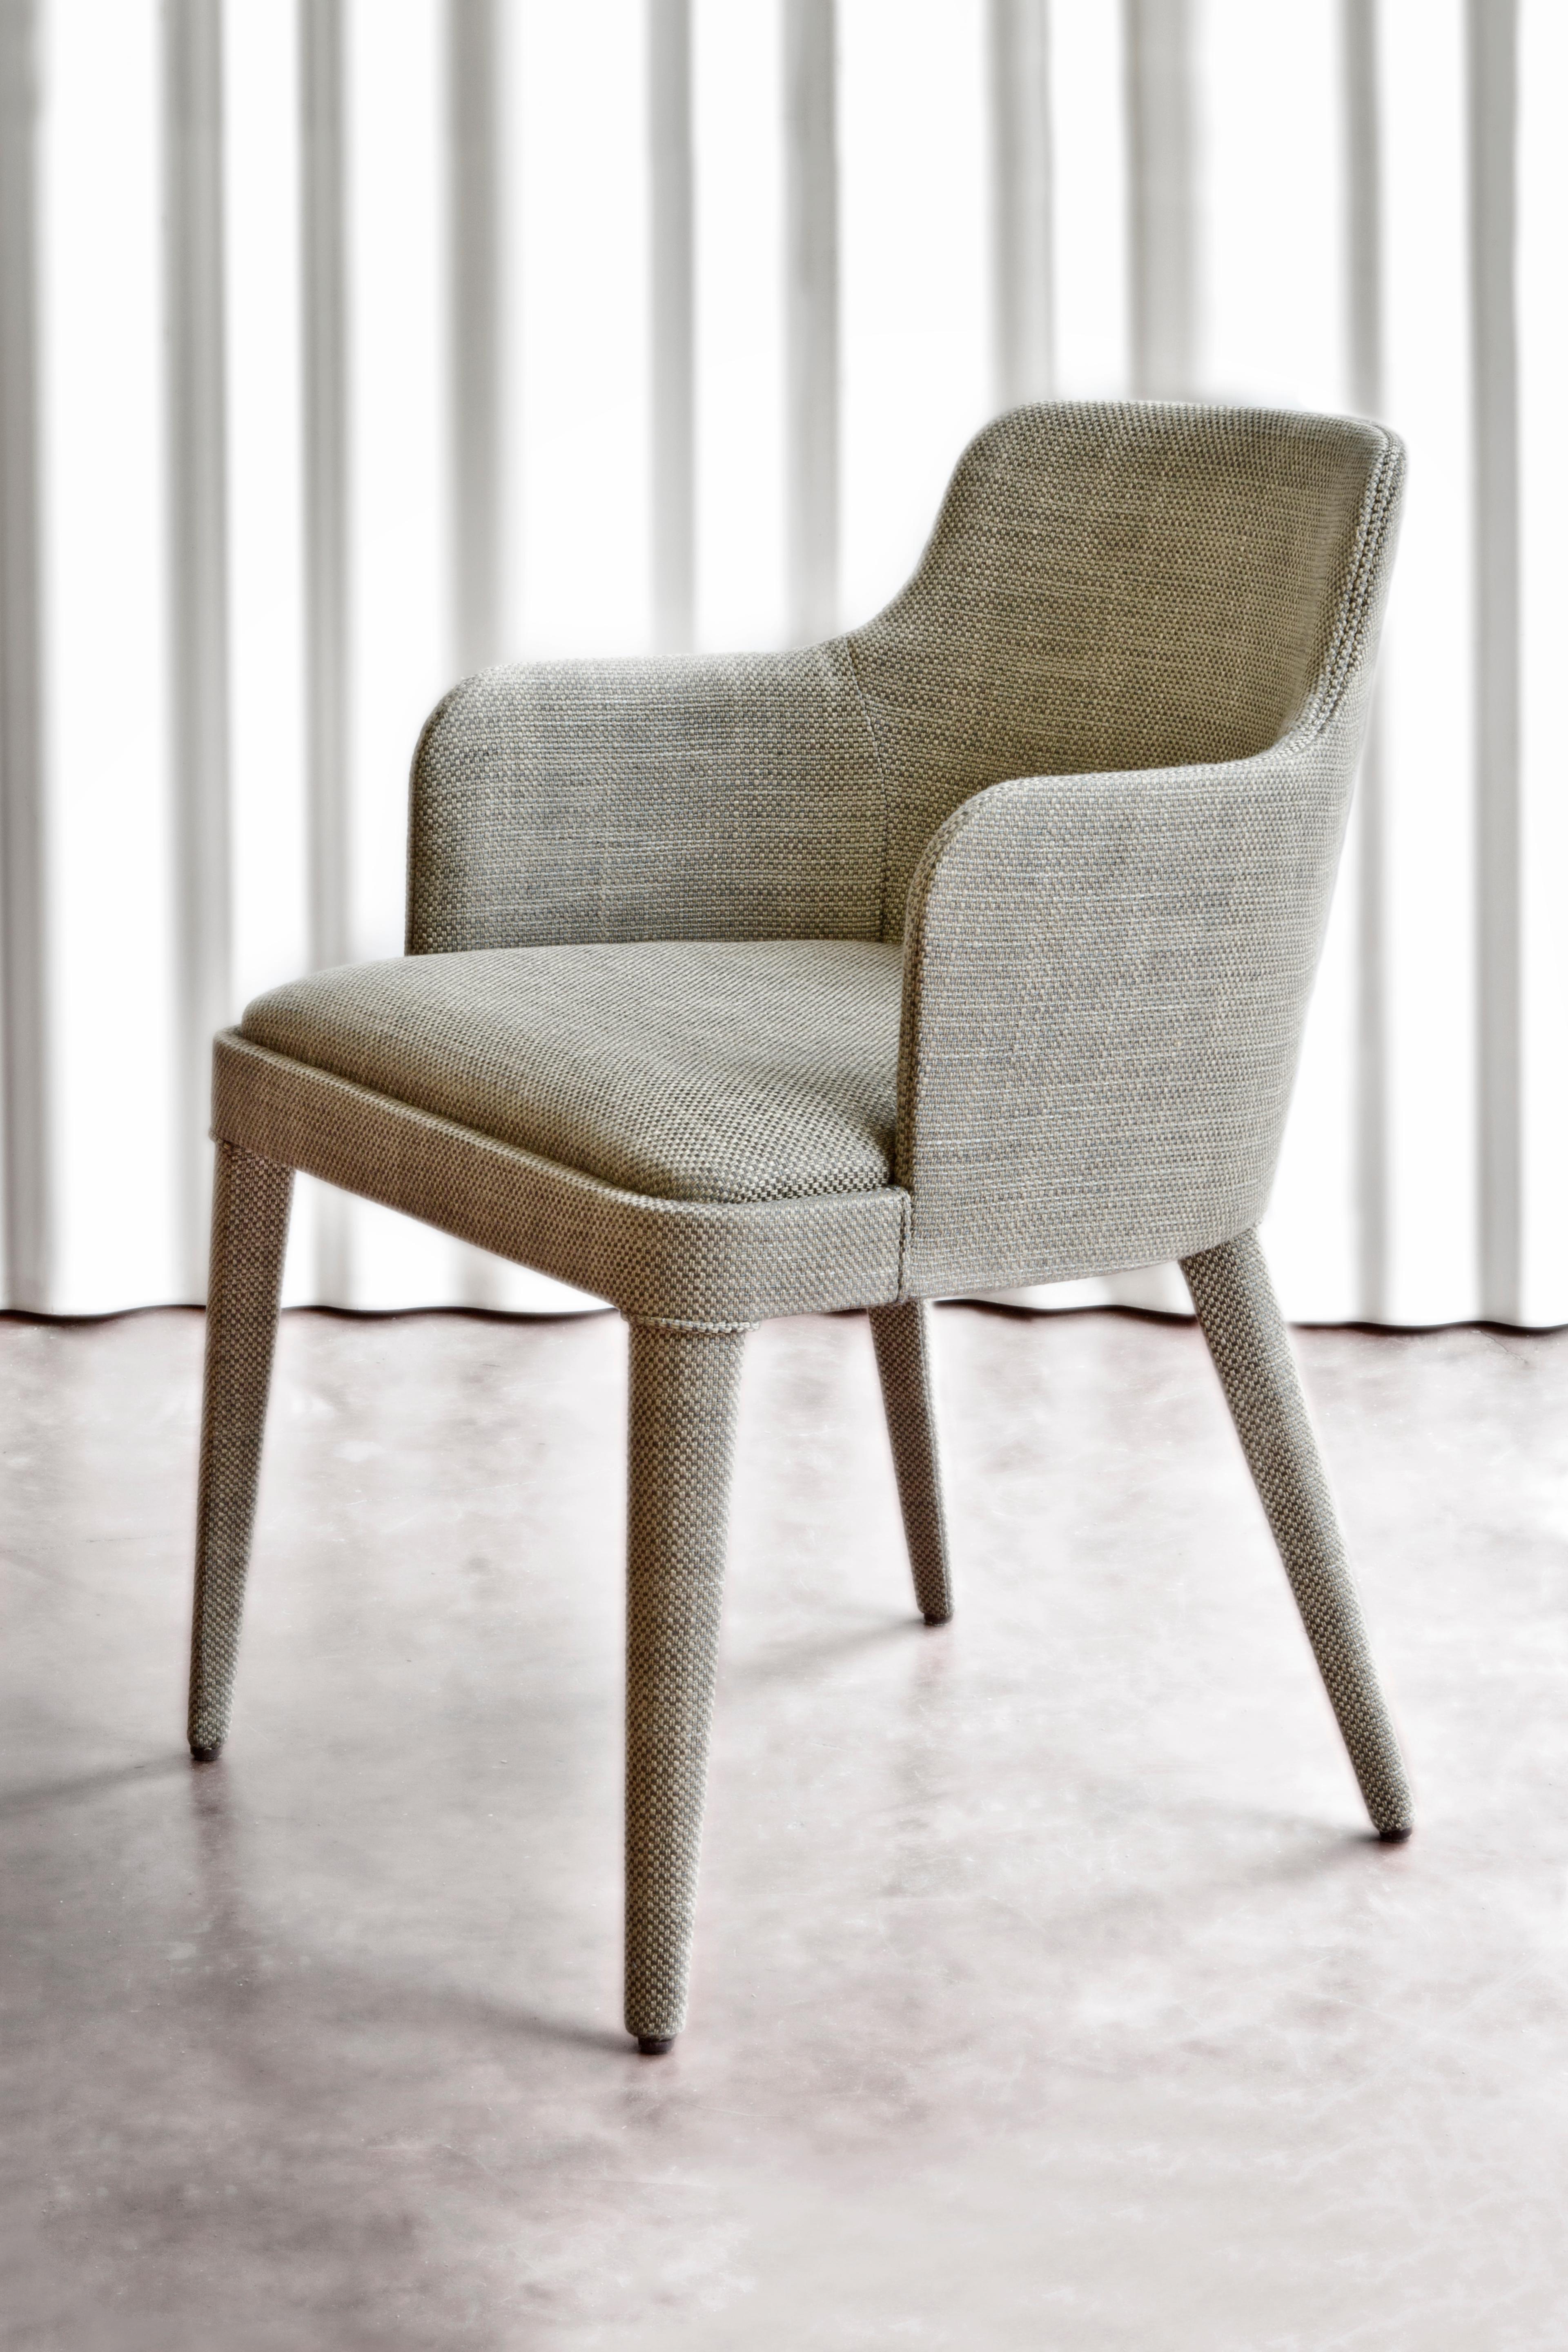 The upholstered armchair is a classic and always up-to-date piece, which could not be missing from the Casa Casati catalogue. The Lola armchair, however, has been revisited in the proportions and finishes to become more comfortable and more